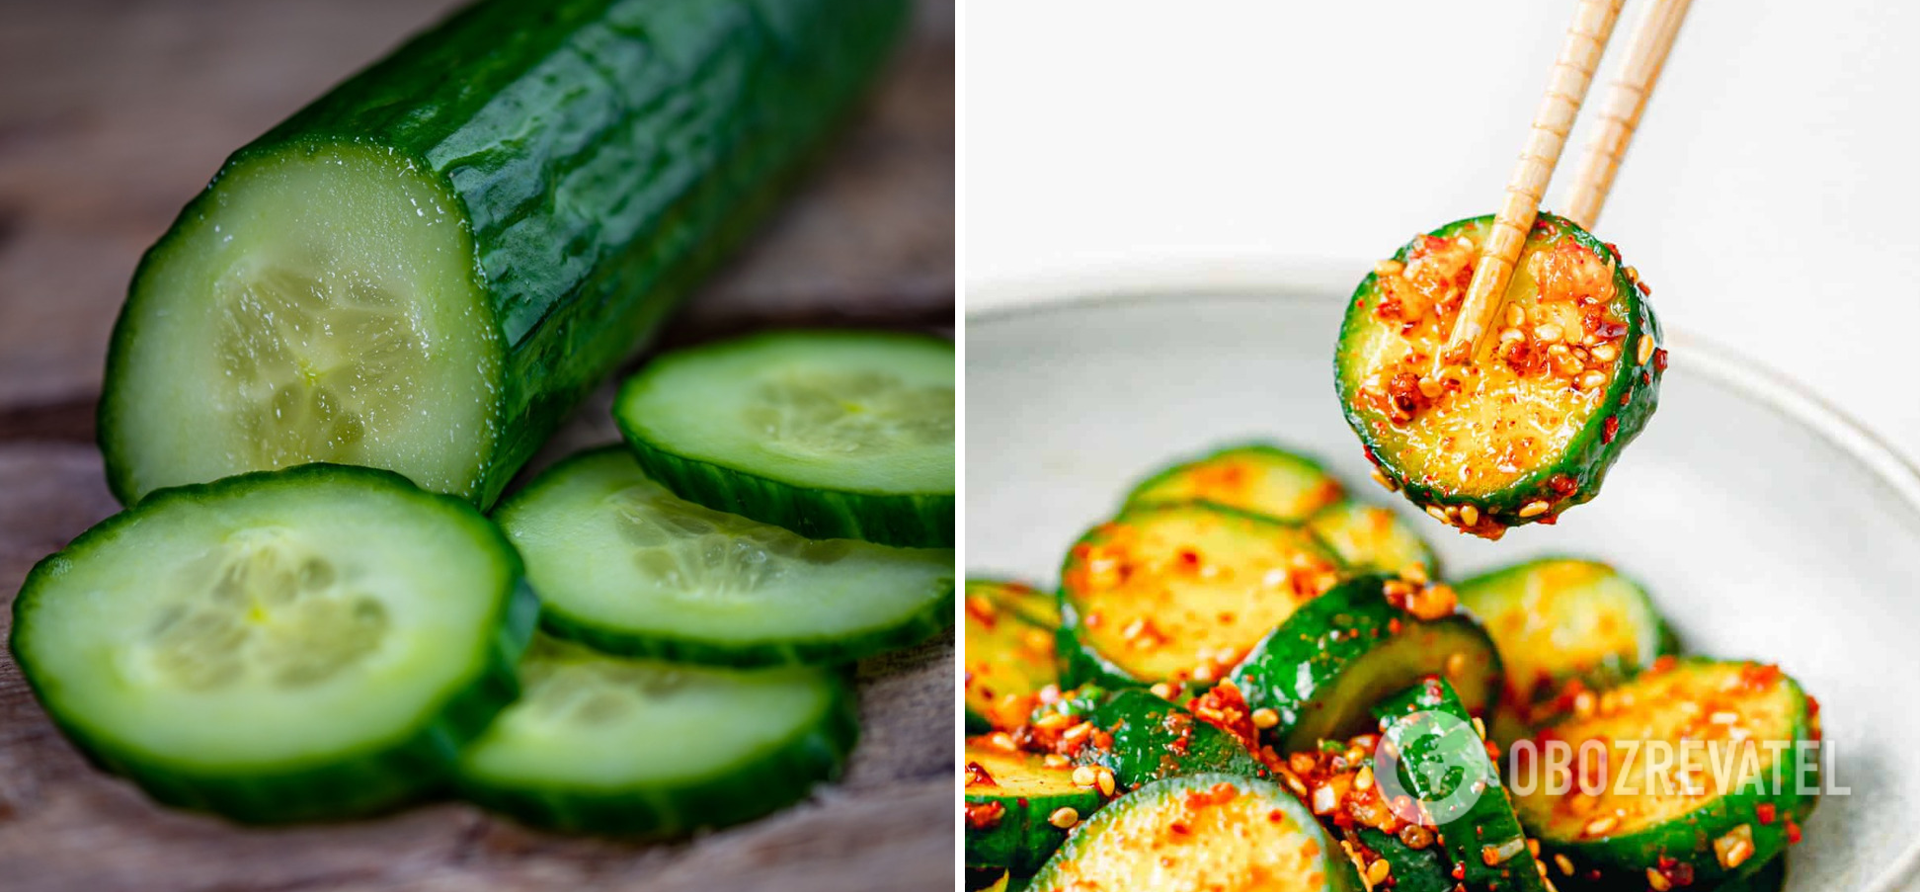 Cucumber salad without mayonnaise